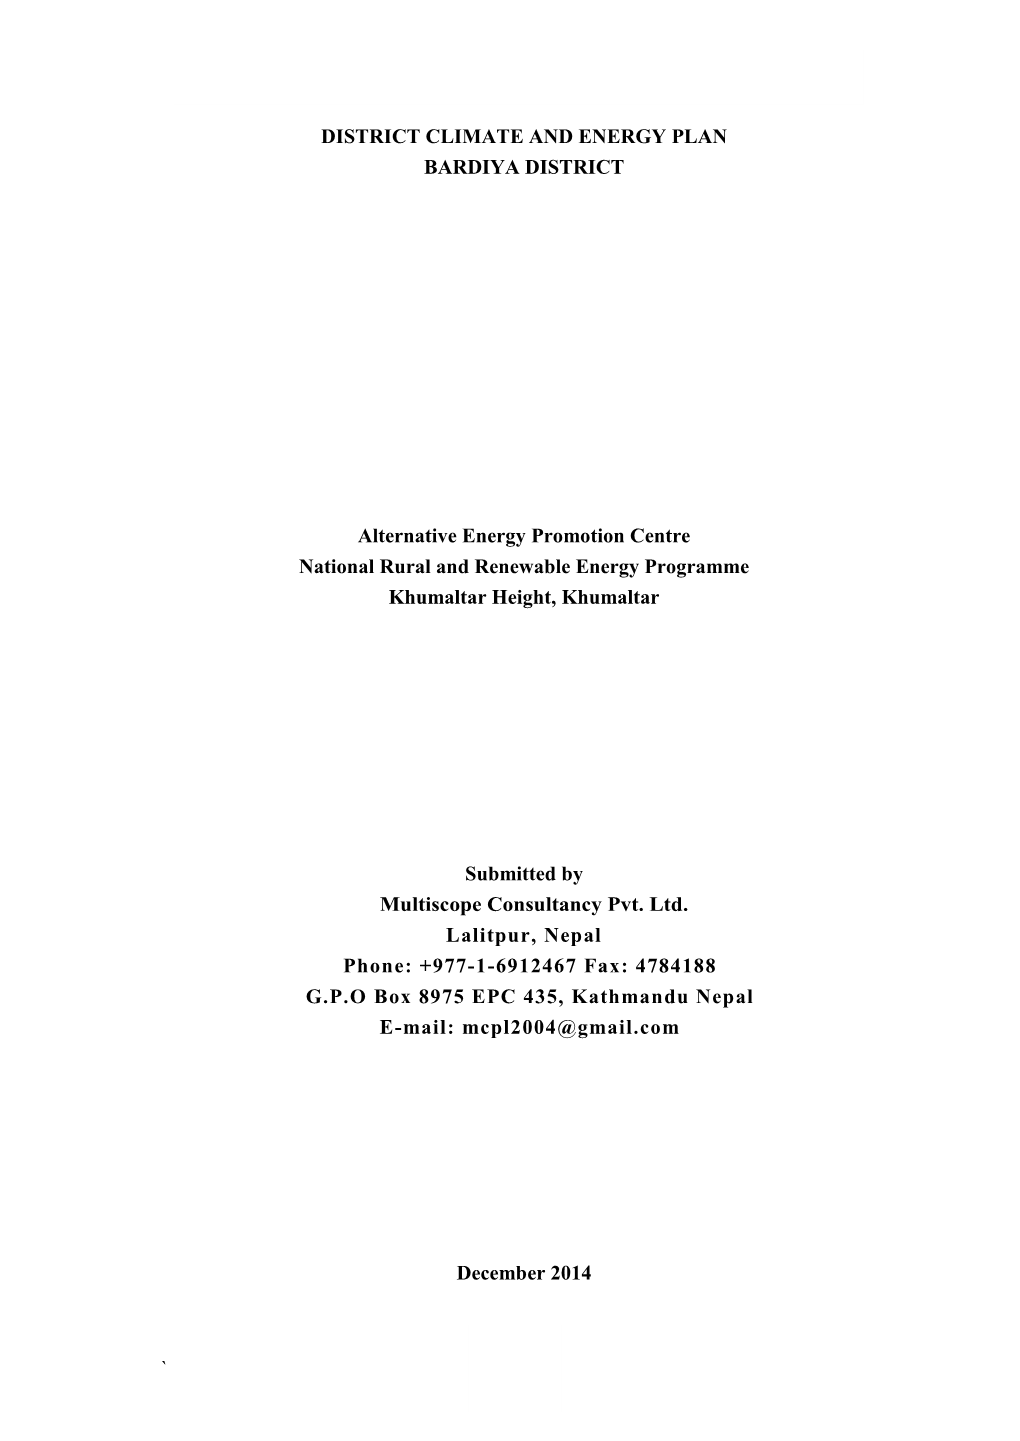 District Climate and Energy Plan for Bardiya District 1 ` DISTRICT